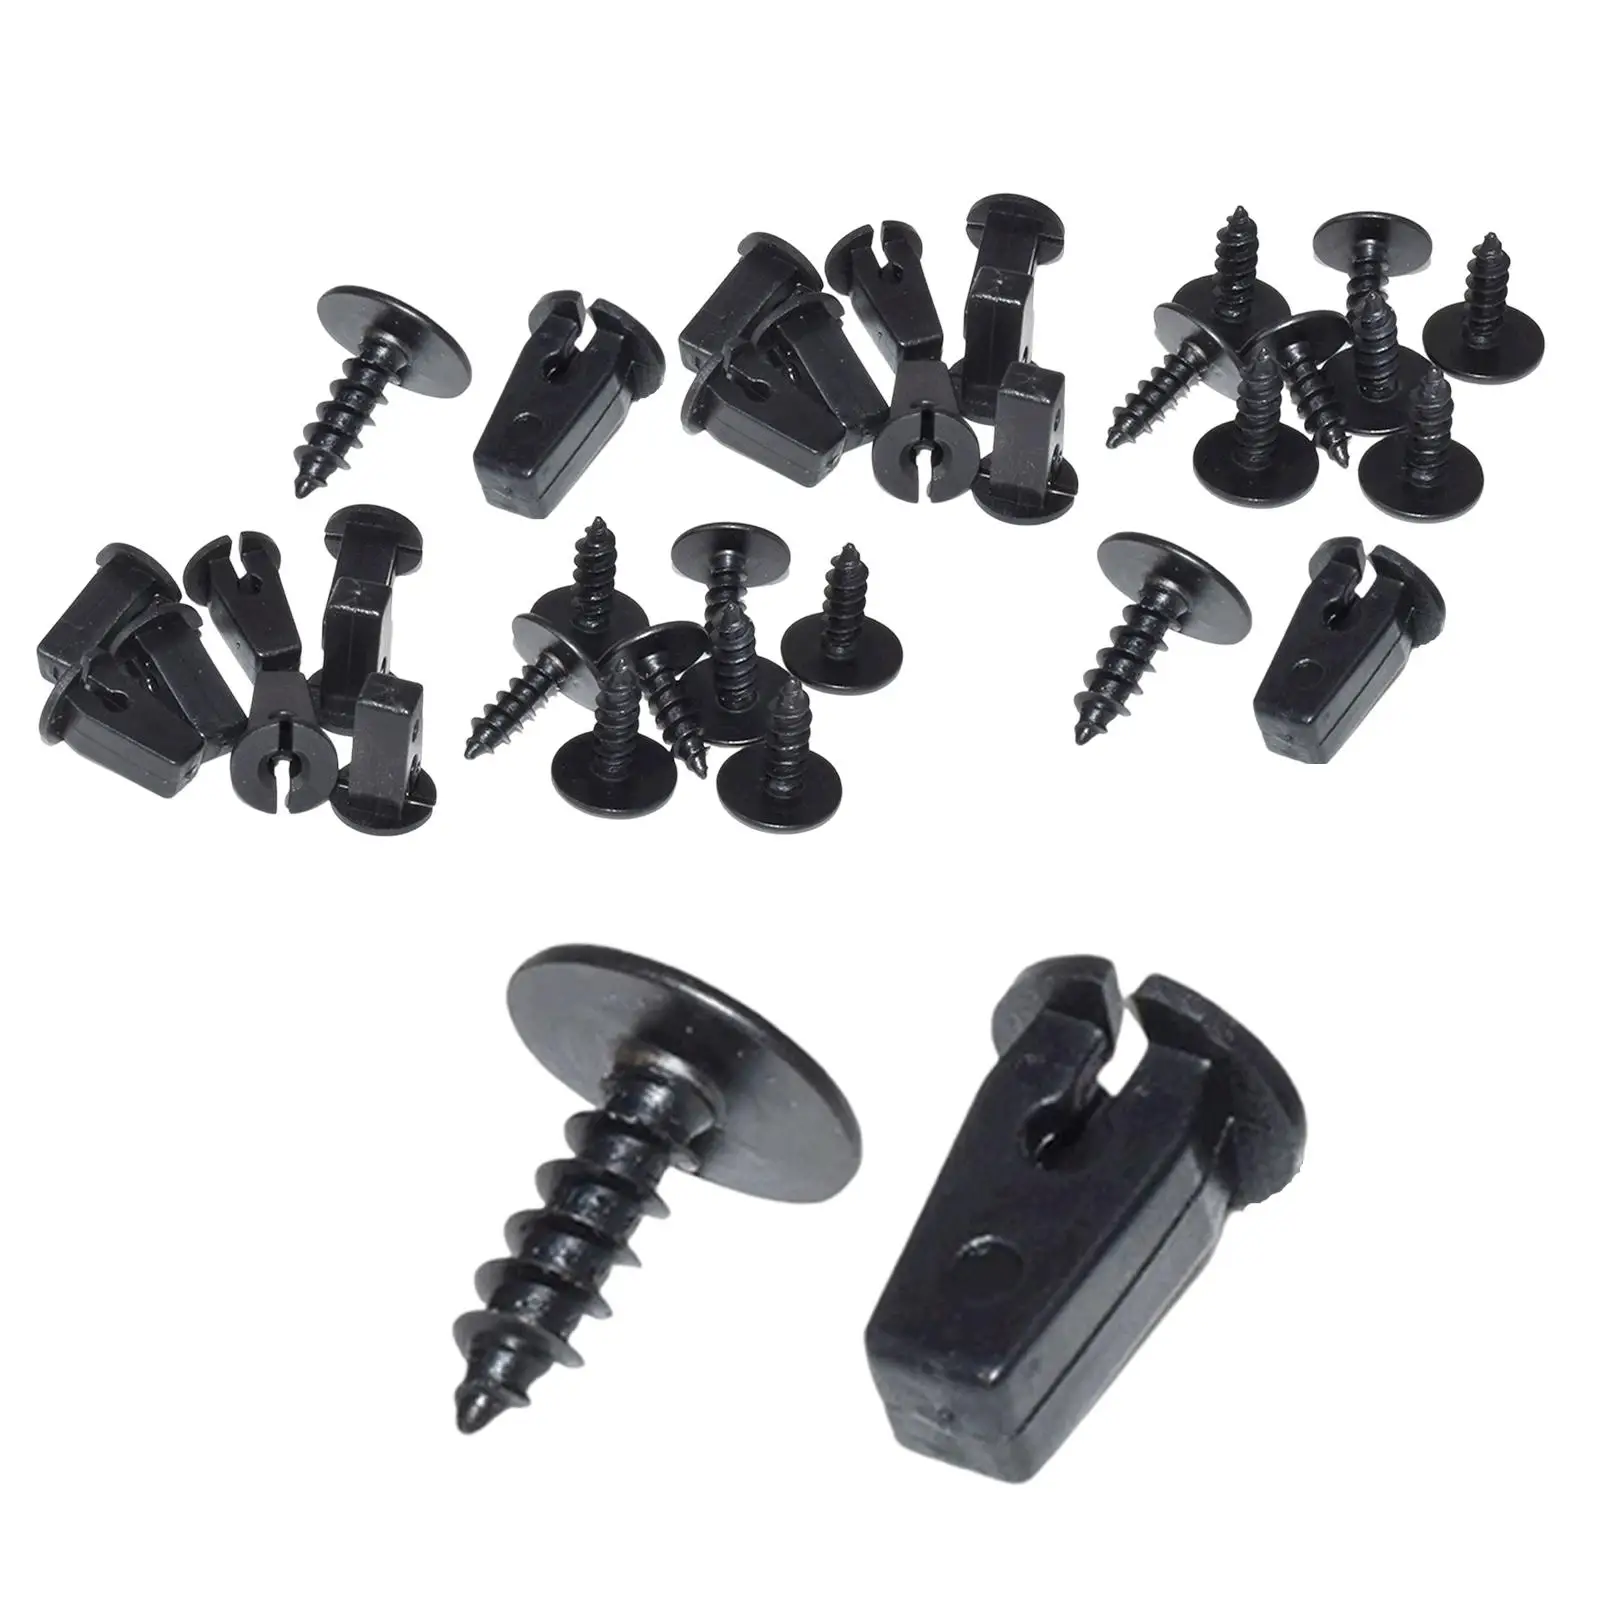  Nuts Grommets Screws Replacement Kit Plastic for Bumper Panel